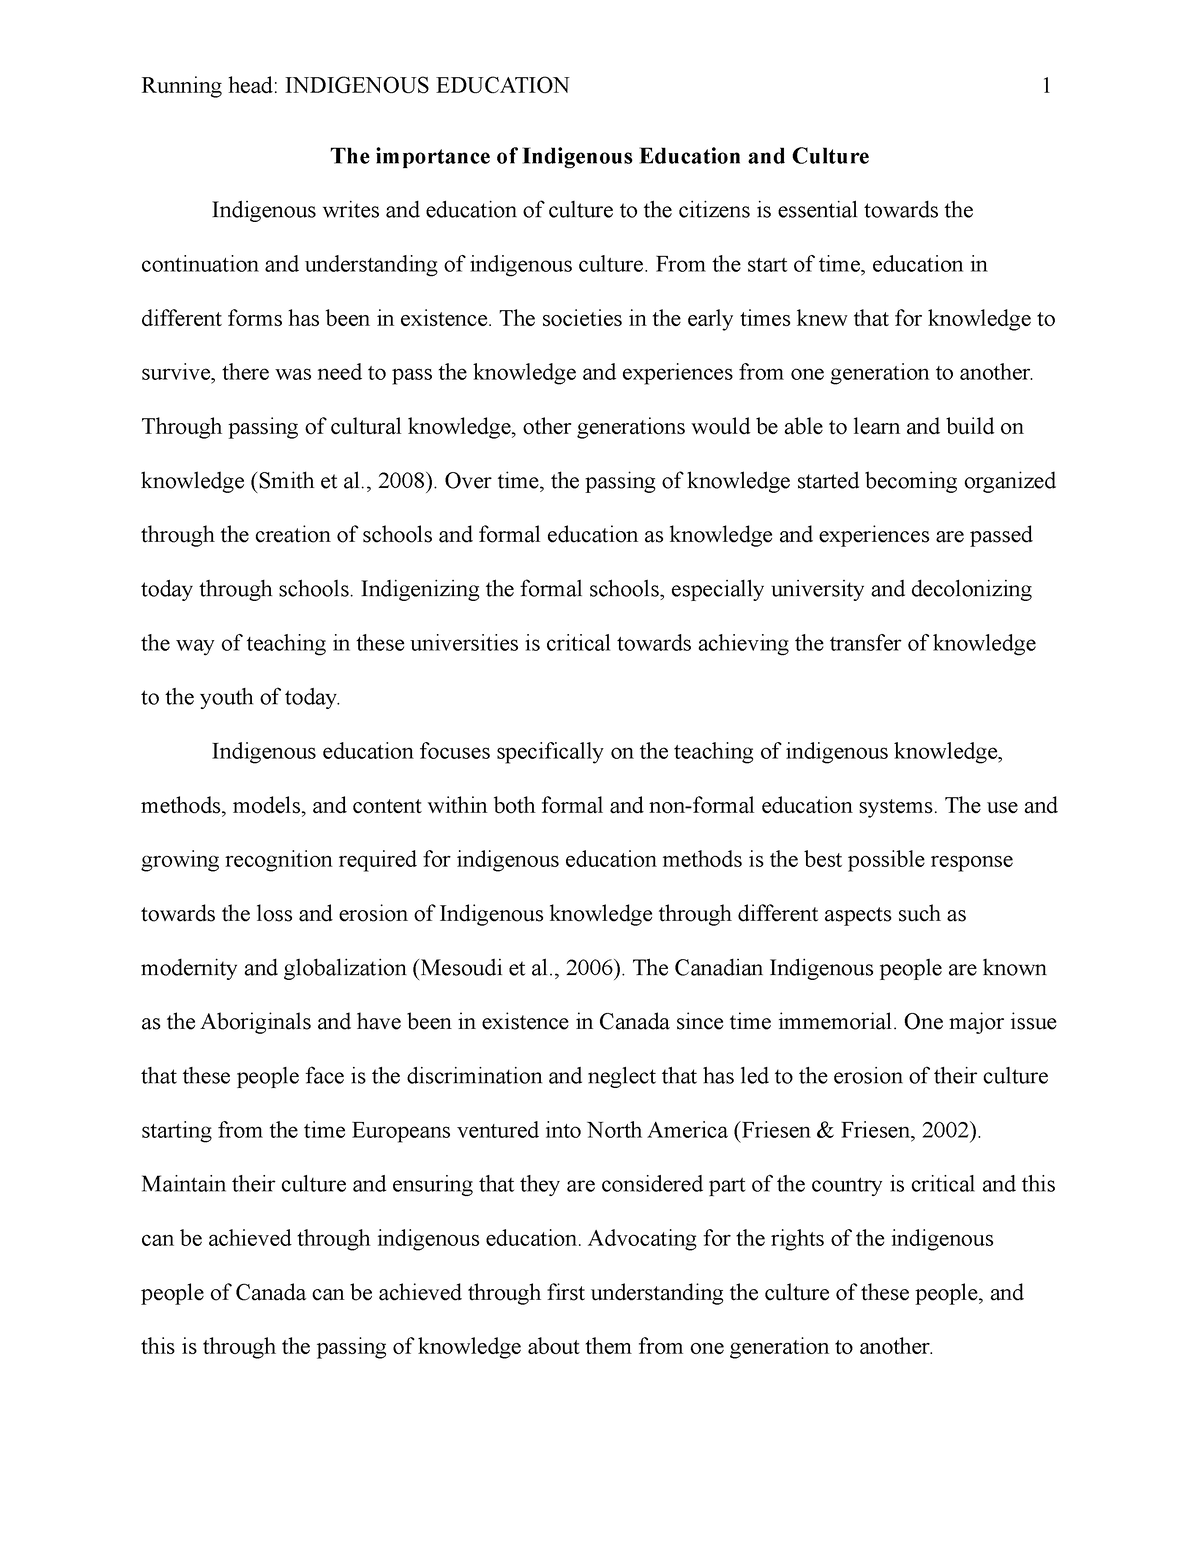 personal teaching statement on indigenous education